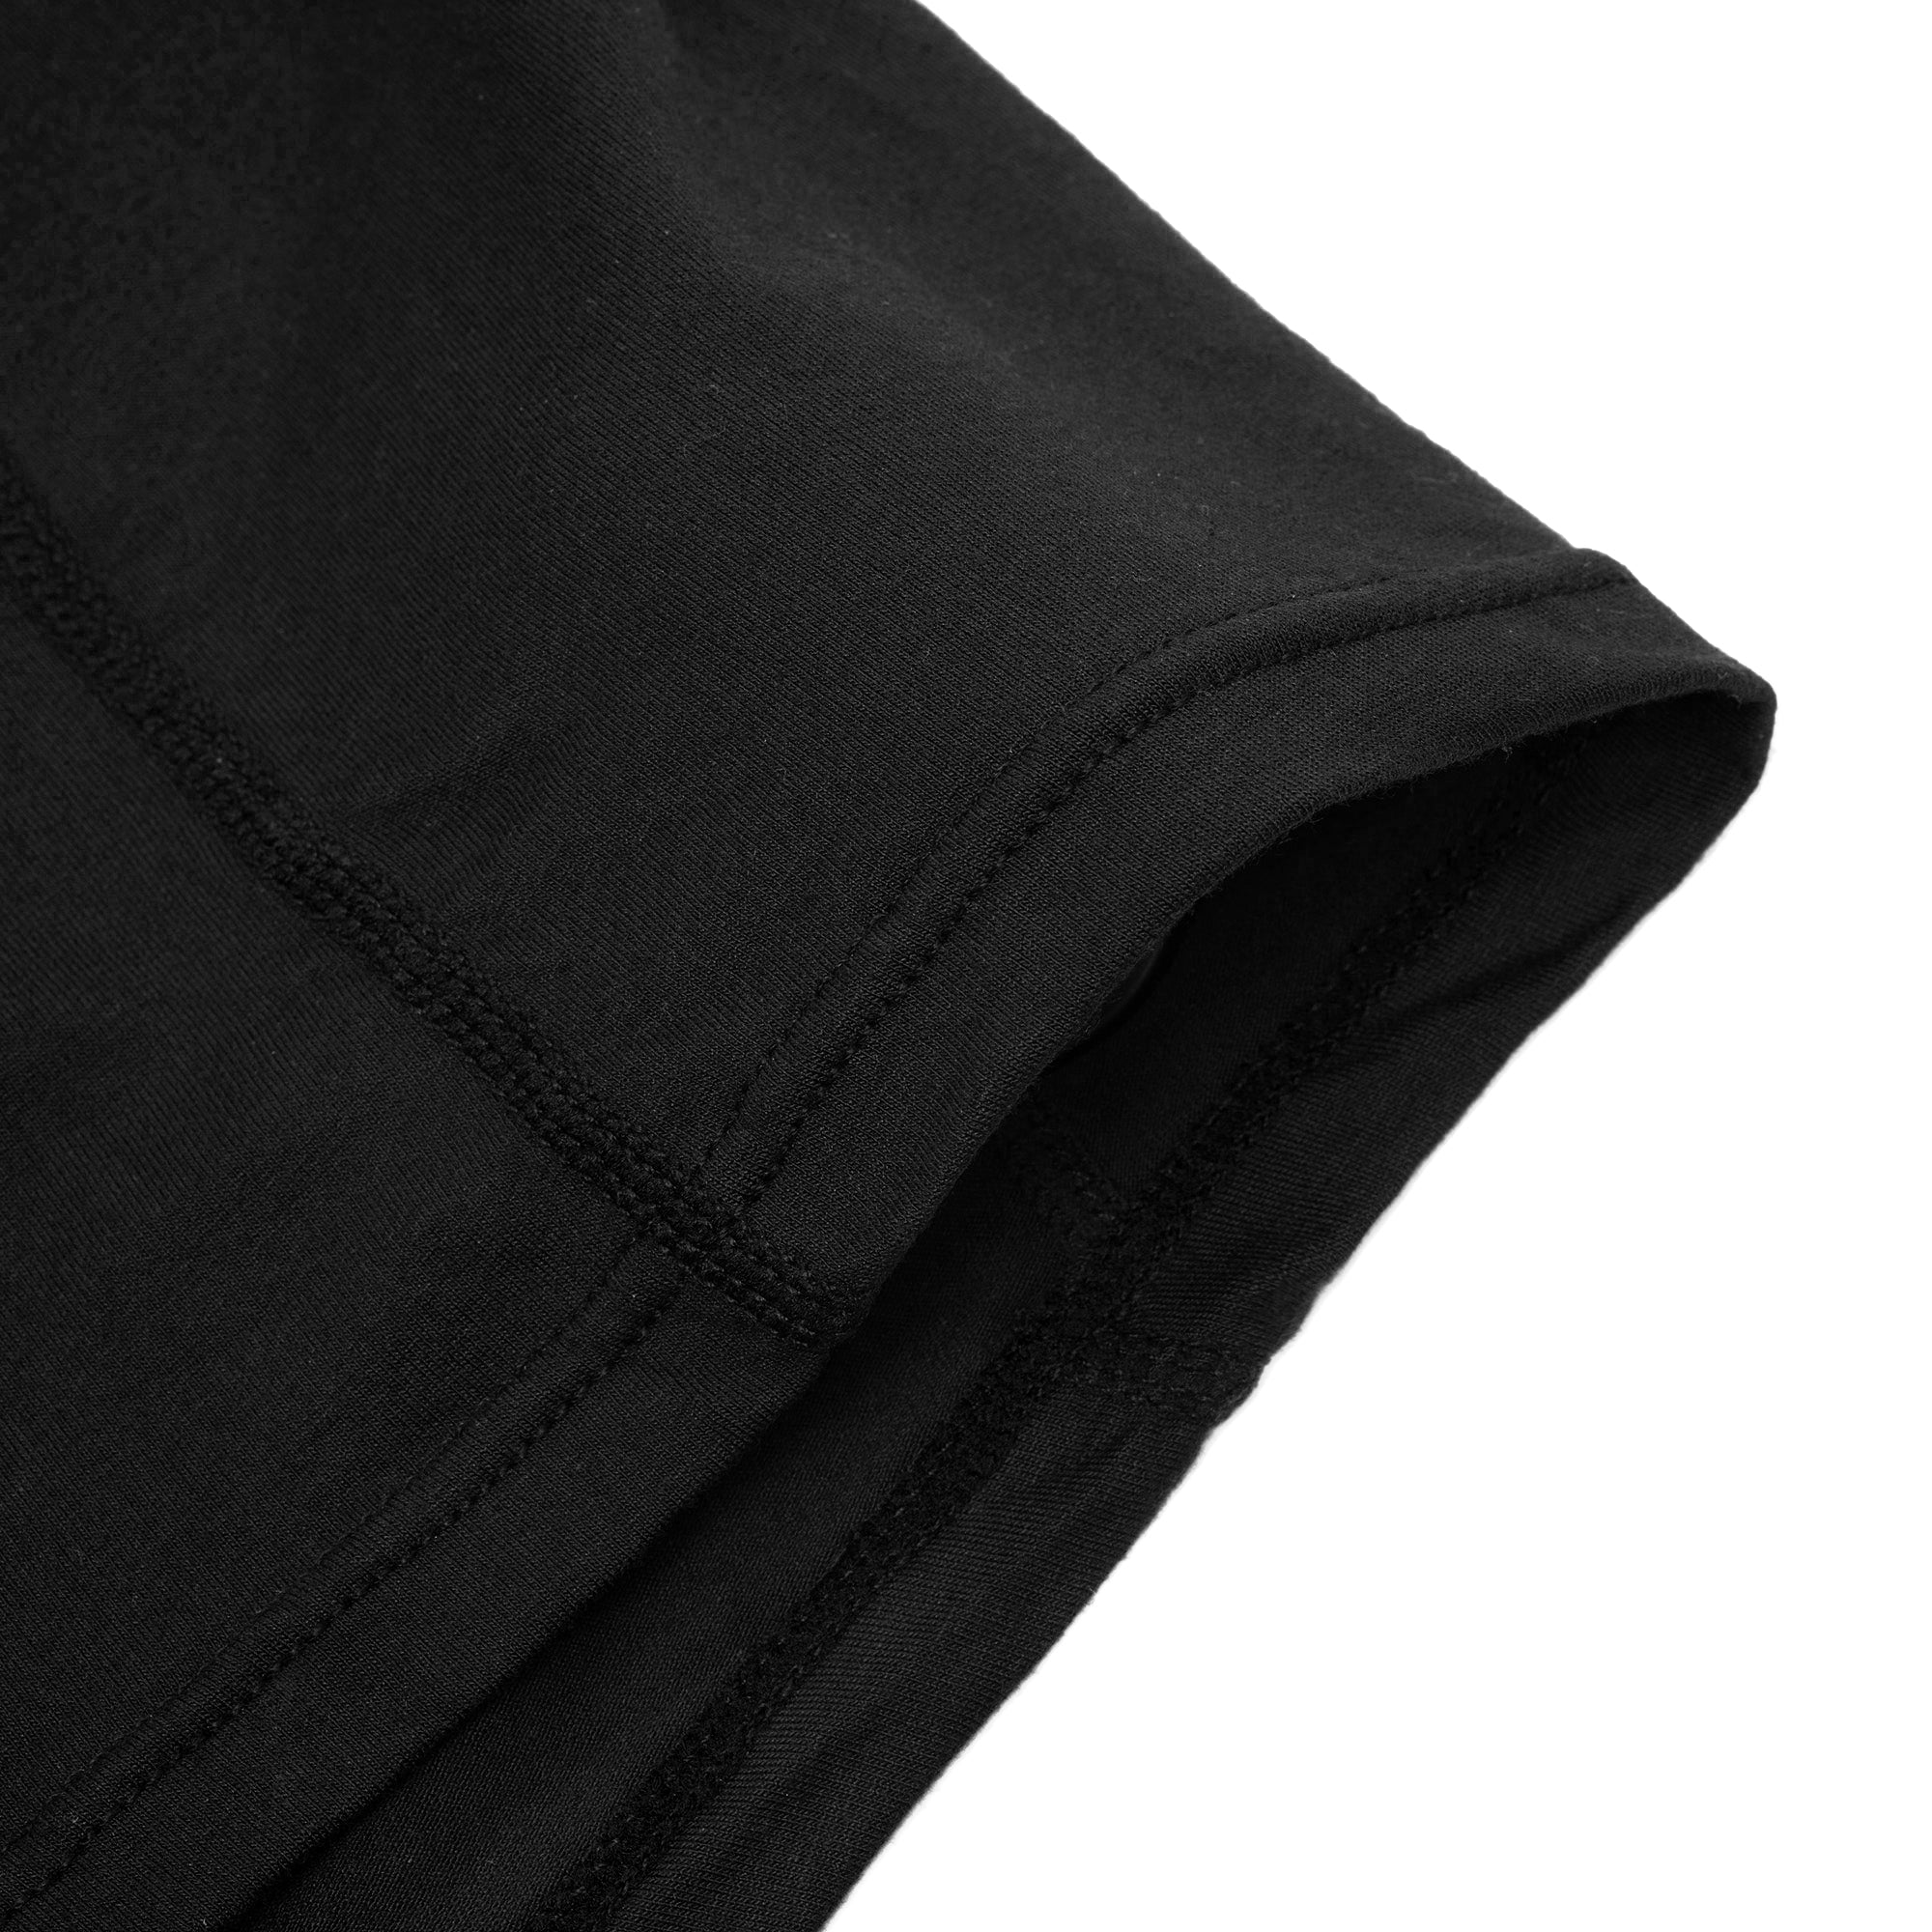 BOXR | The Classic Bamboo Boxers 4-Pack Black